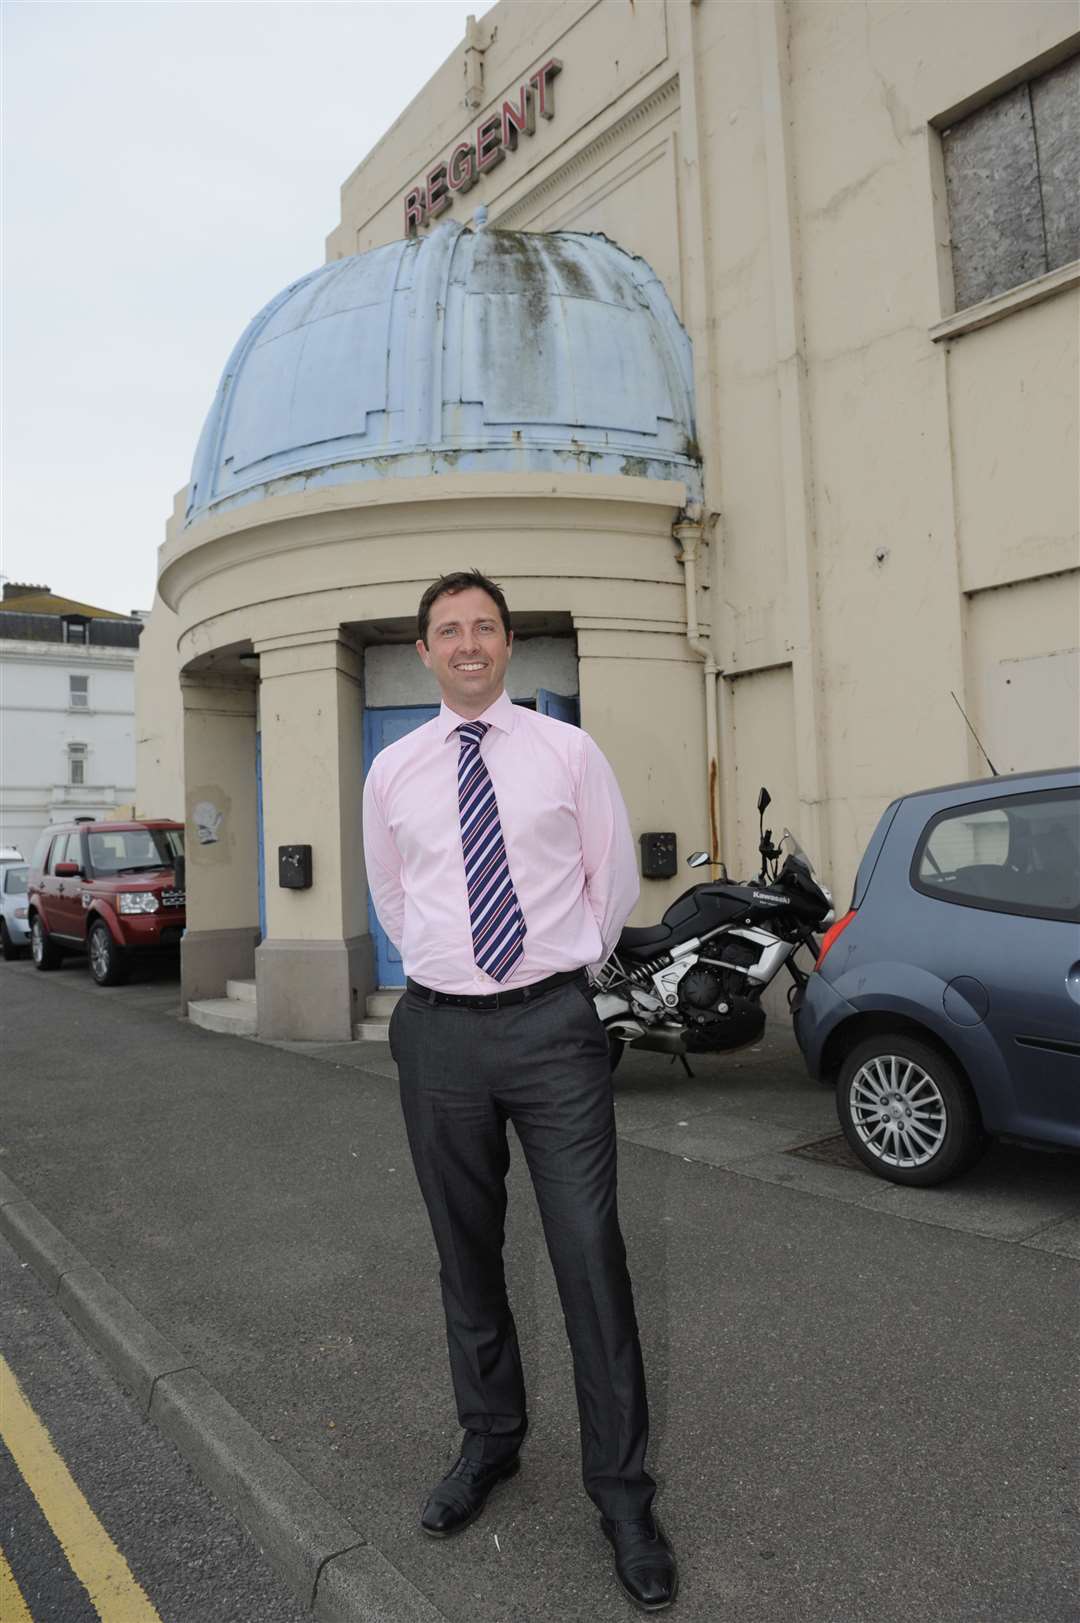 James Wallace, joint owner of The Regent, wants to turn the building back into a cinema